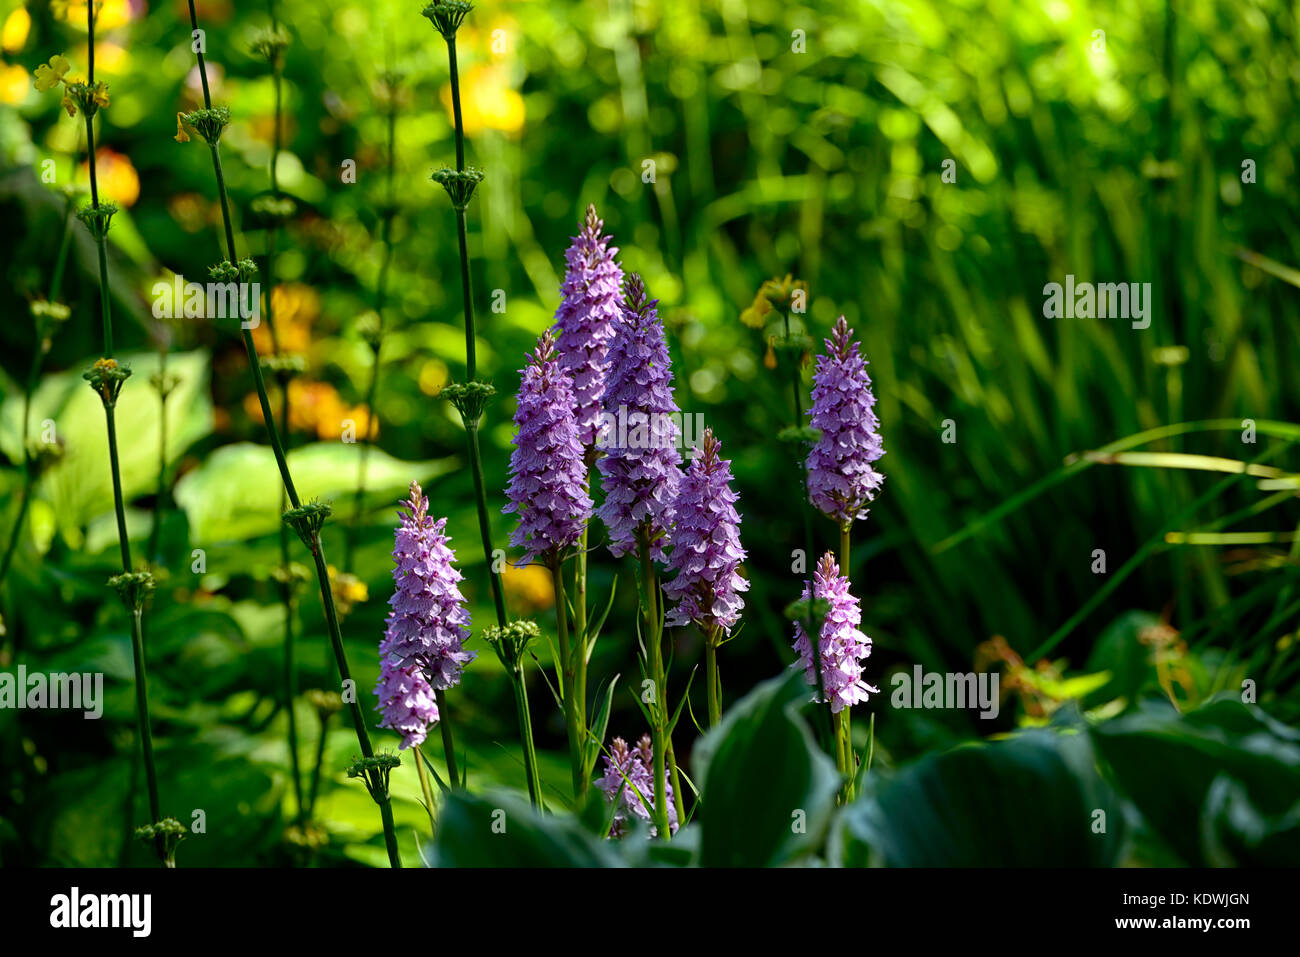 dactylorhiza fuchsii, common spotted orchid, inflorescence, pale purple, flower, flowers, green, foliage, leaves, plants, perennials, marsh orchids, f Stock Photo